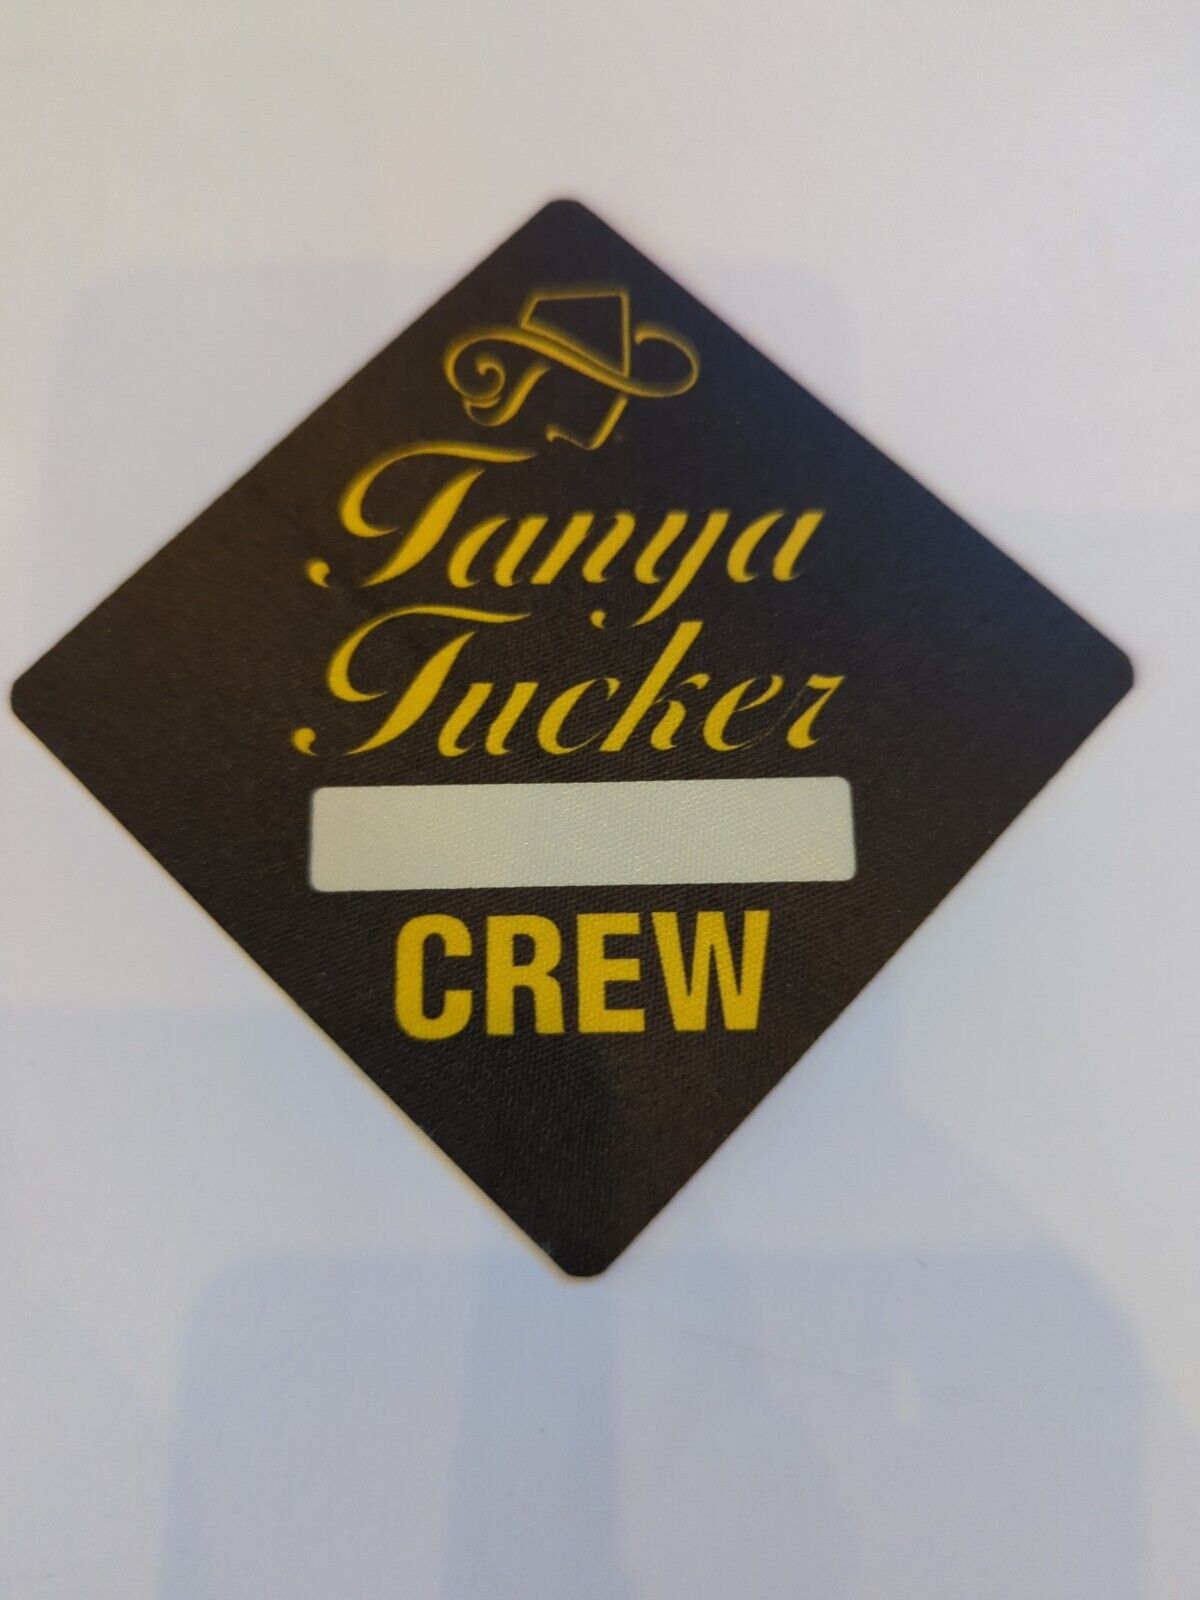 Tanya Tucker Crew Unpeeled Backstage Pass Black Gold Unmarked